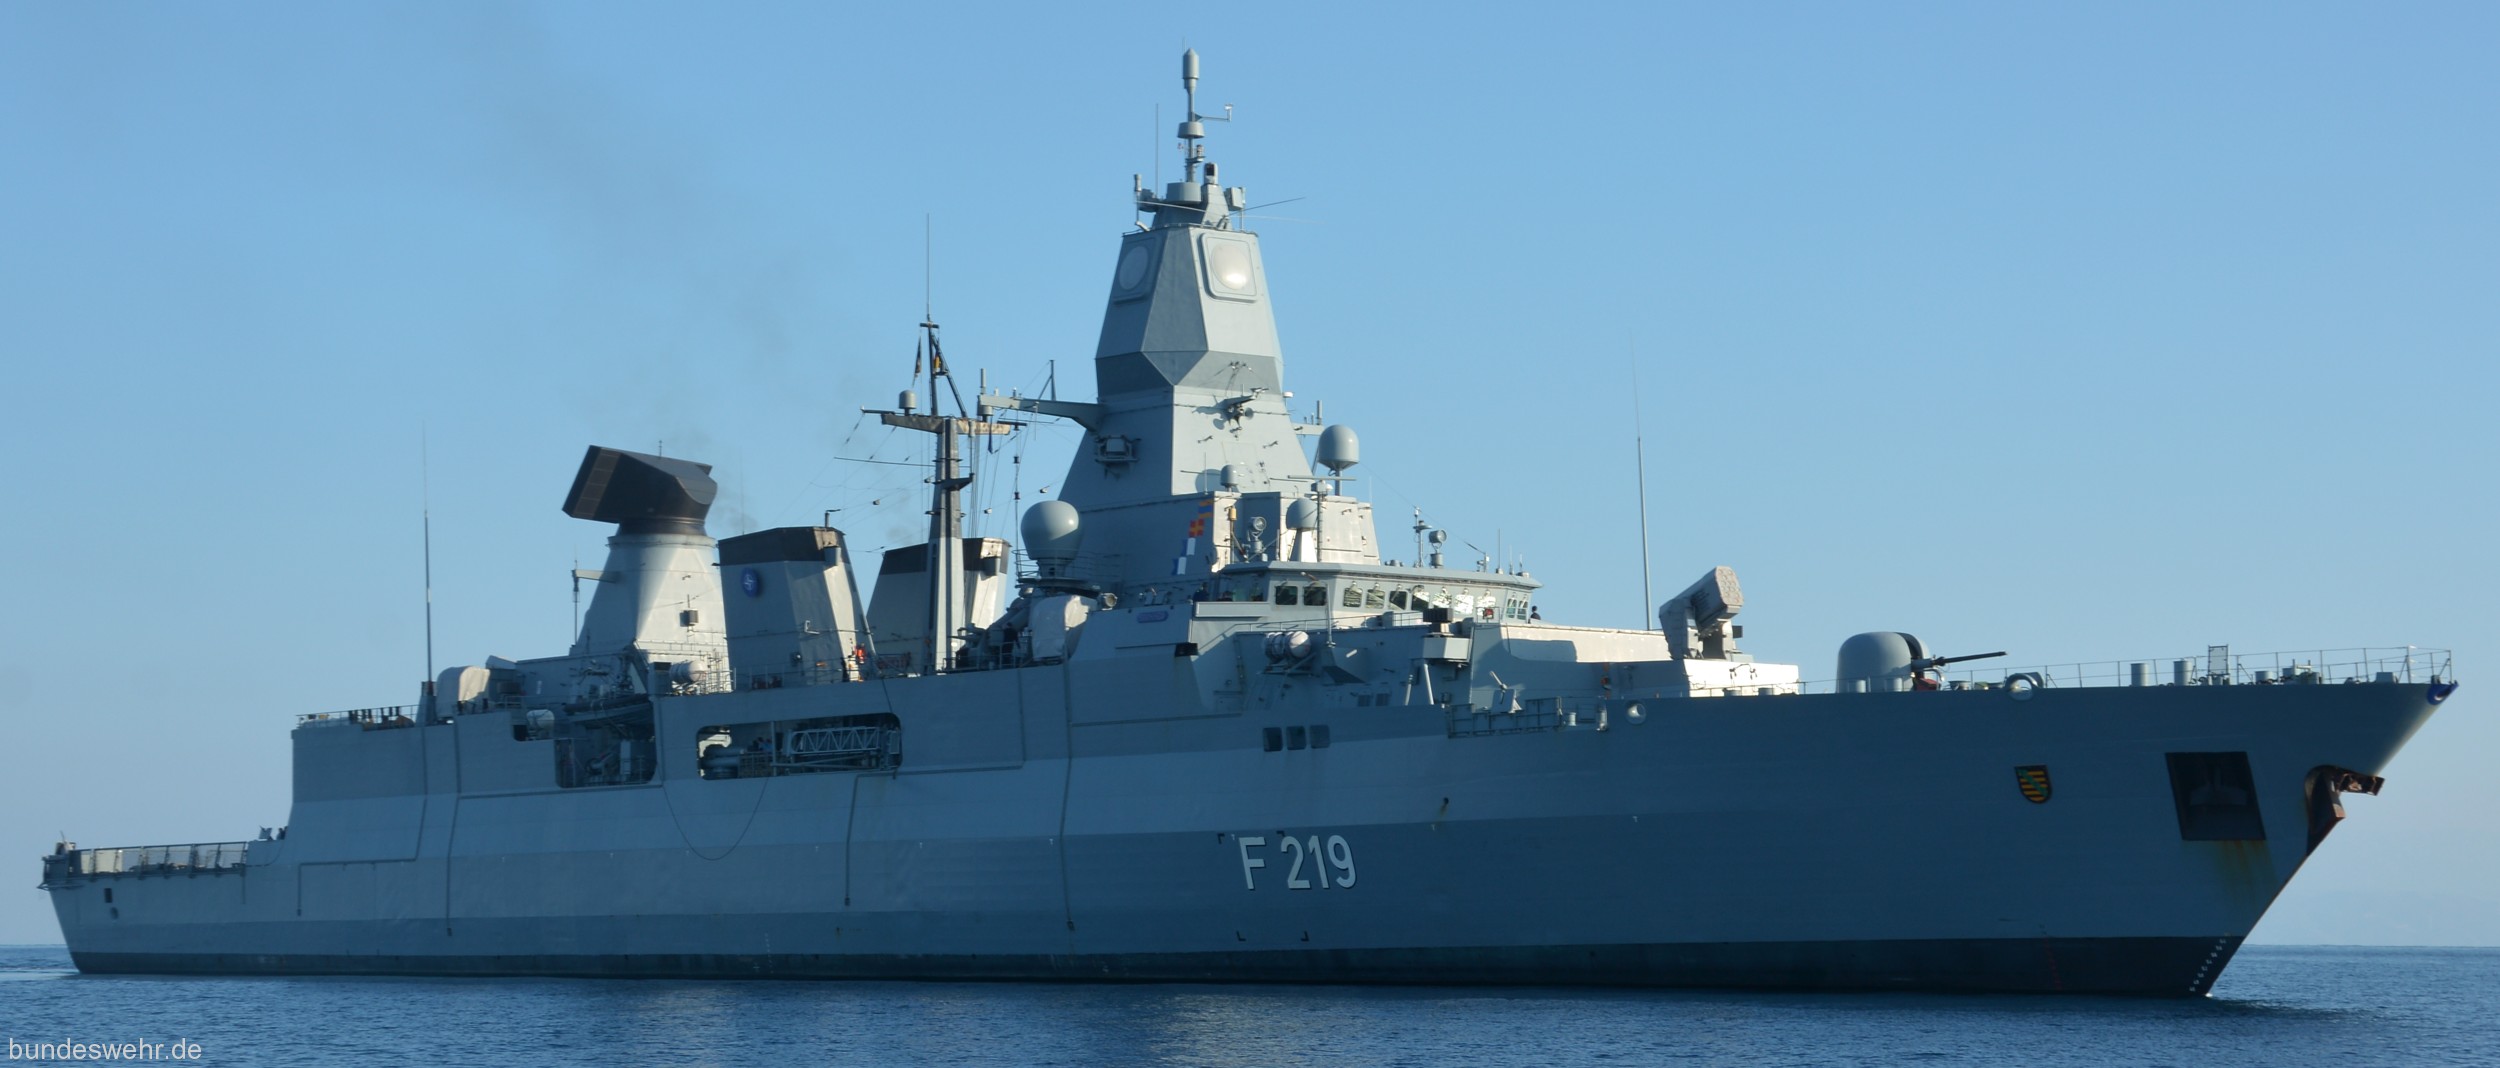 f-219 fgs sachsen type 124 class guided missile frigate ffg german navy 03